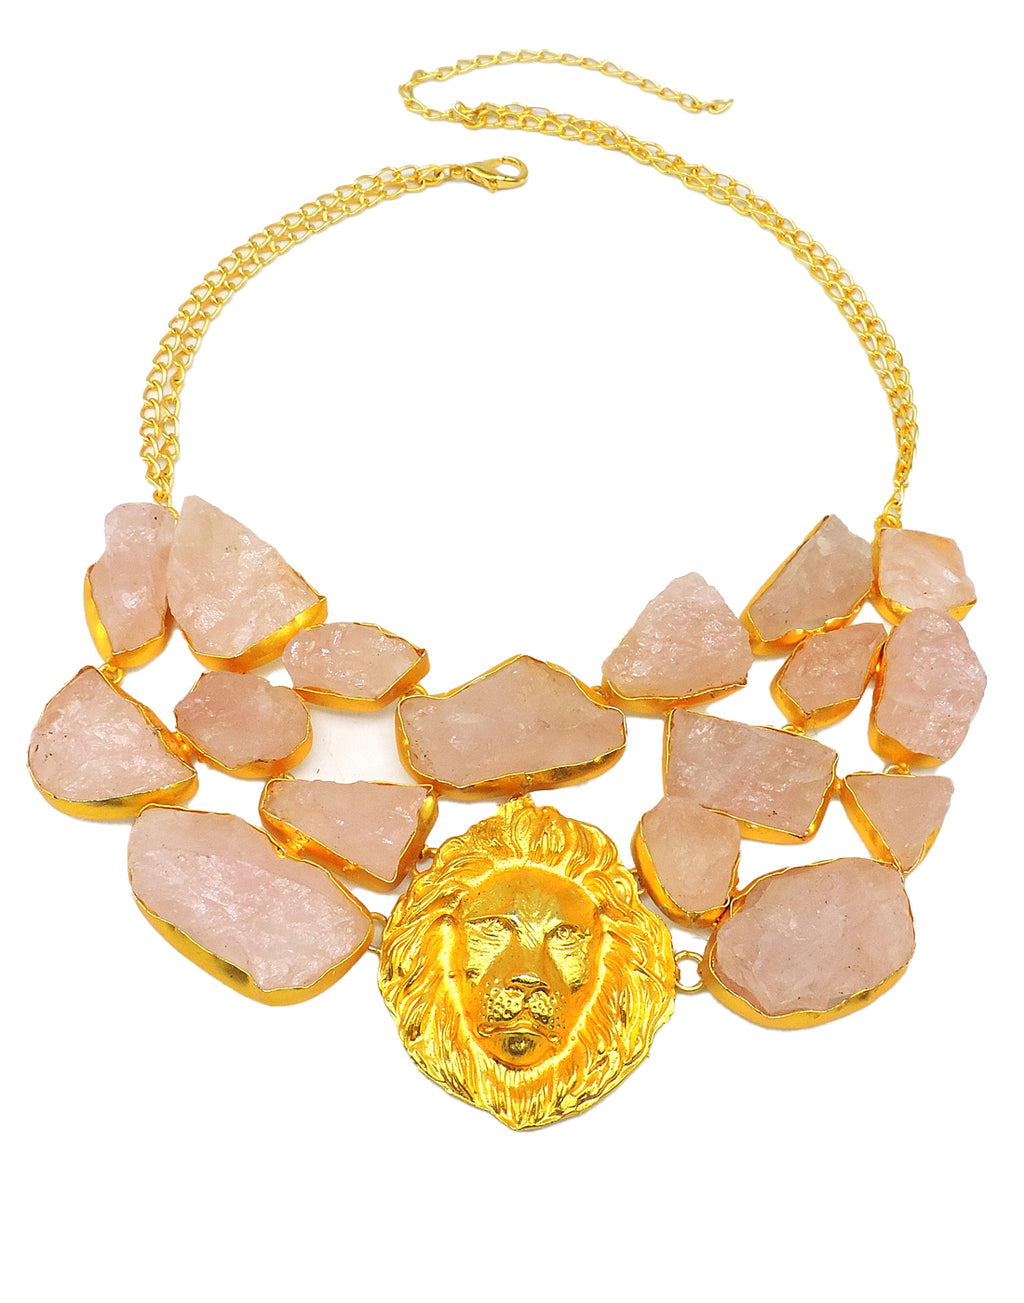 Lion & Rose Statement Necklace - Statement Necklaces - Gold-Plated & Hypoallergenic Jewellery - Made in India - Dubai Jewellery - Dori